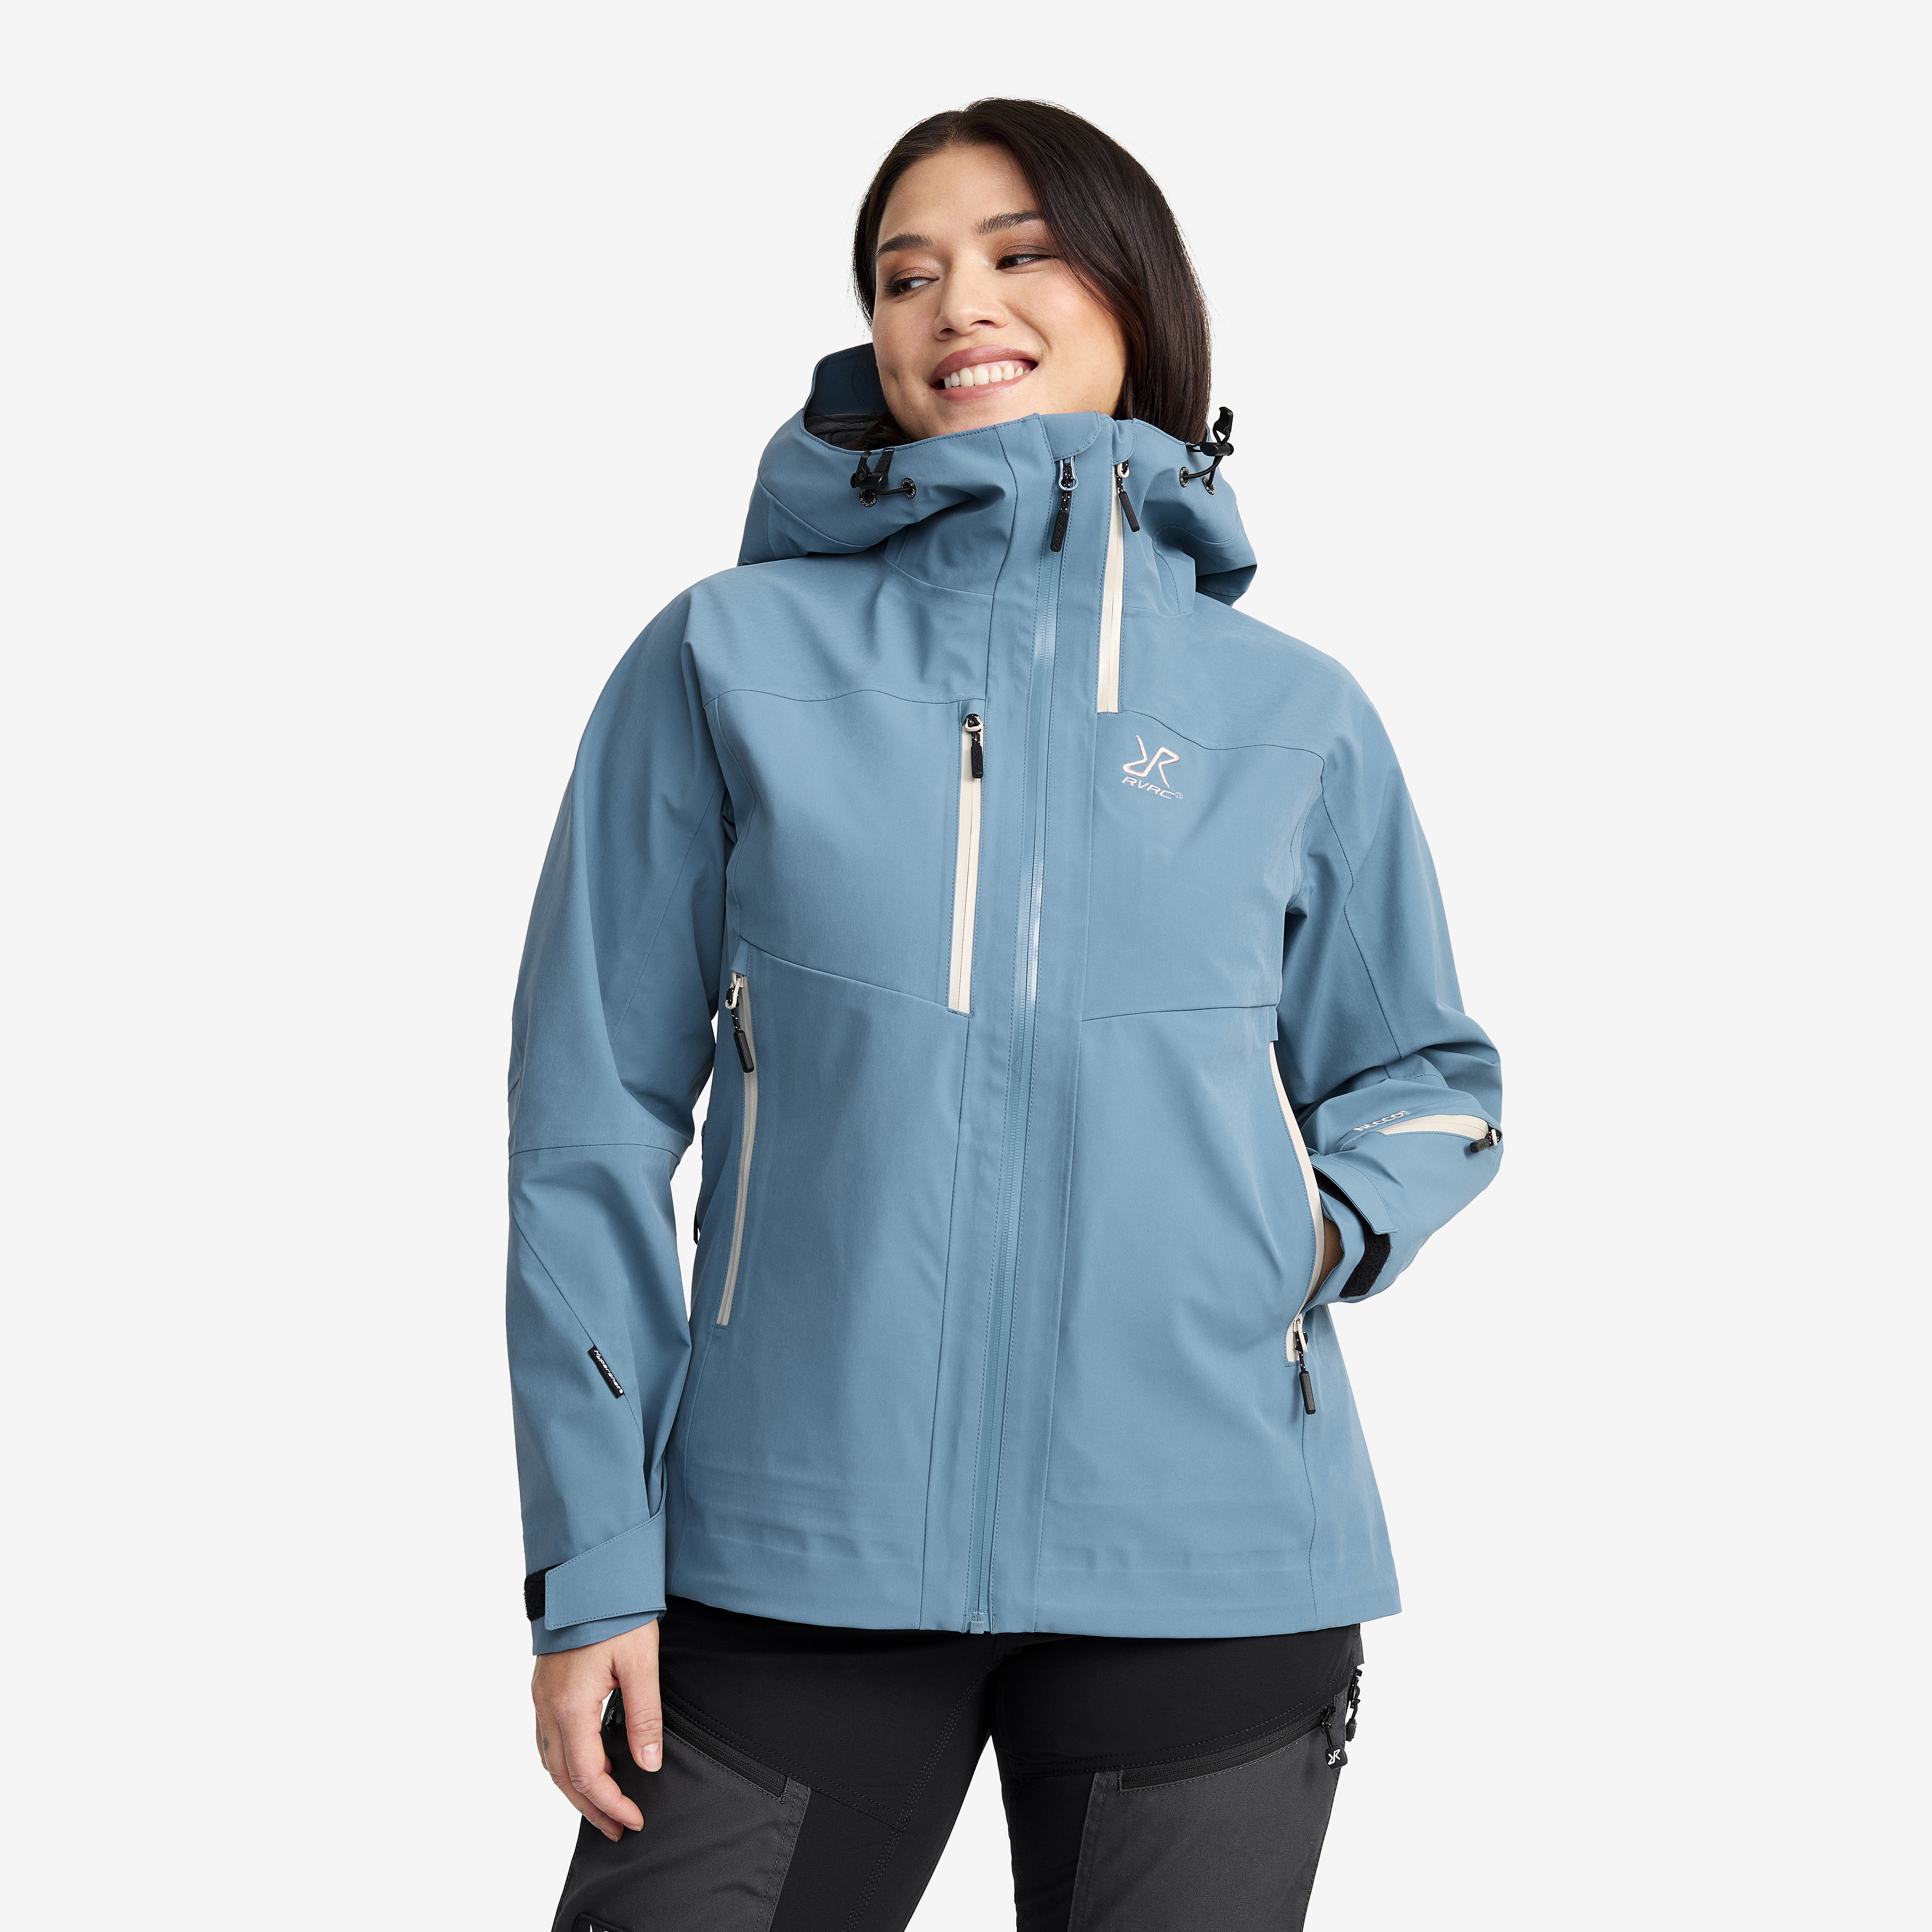 Cyclone 3L Shell Jacket Captain's Blue Mujeres